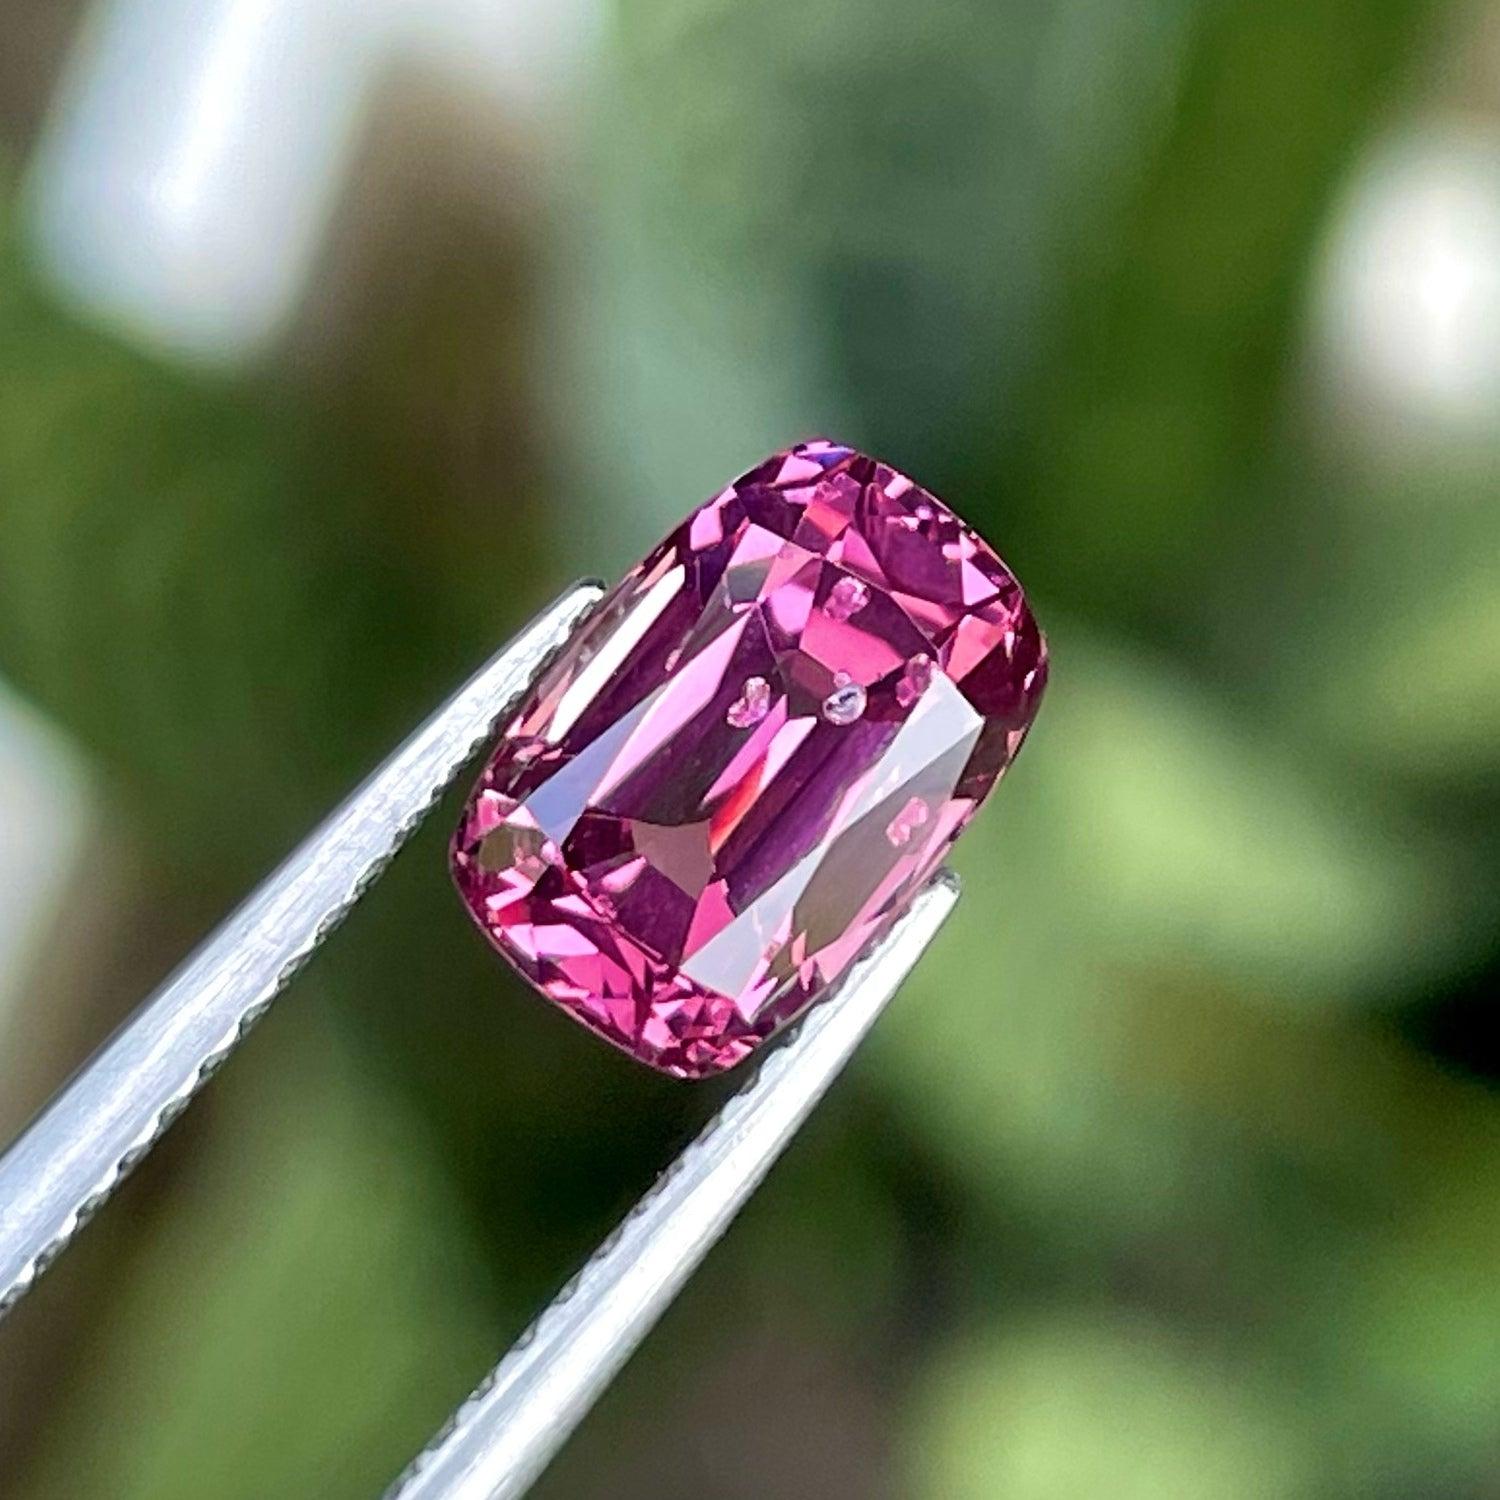 spinel stone